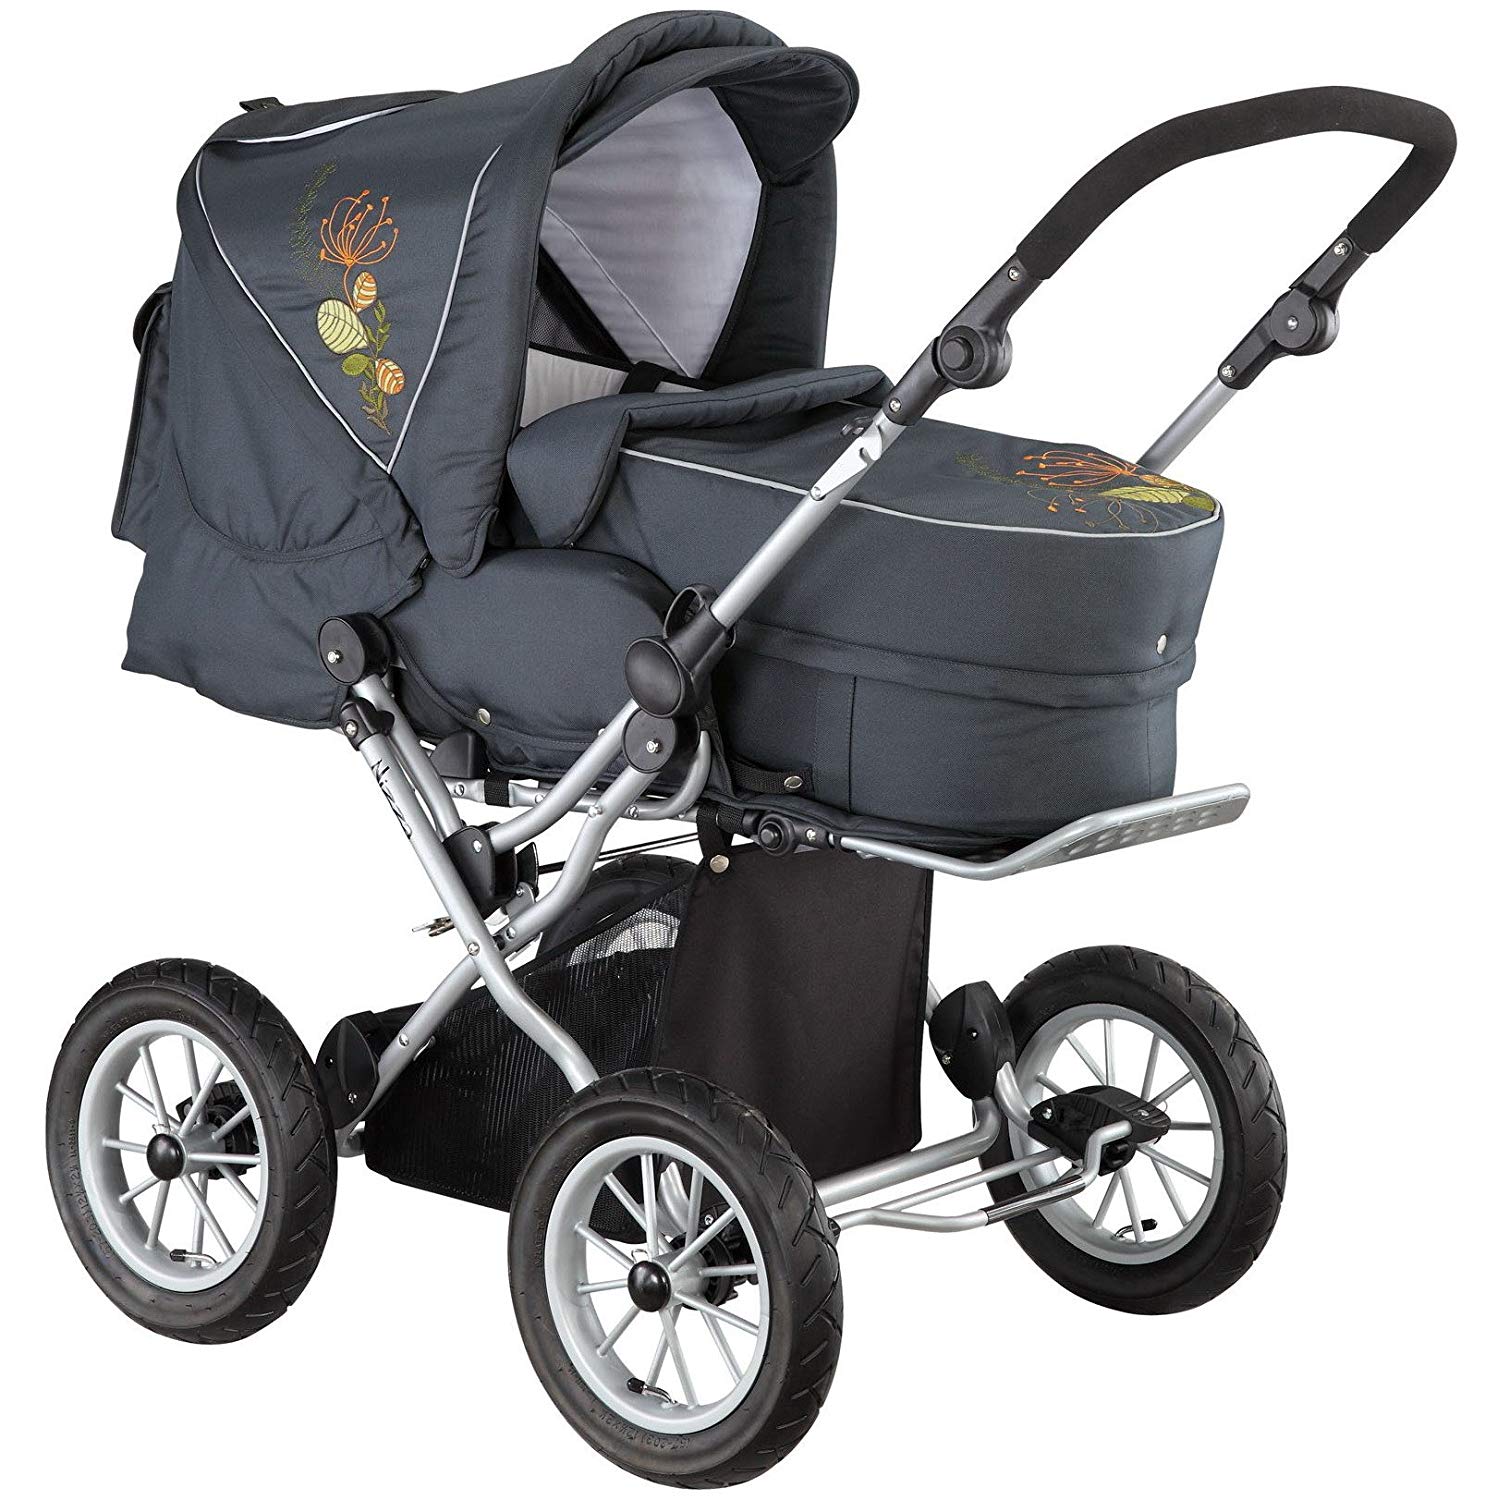 Knorr-Baby Nizza 706941 Travel System with Cooling System Grey/Flowery